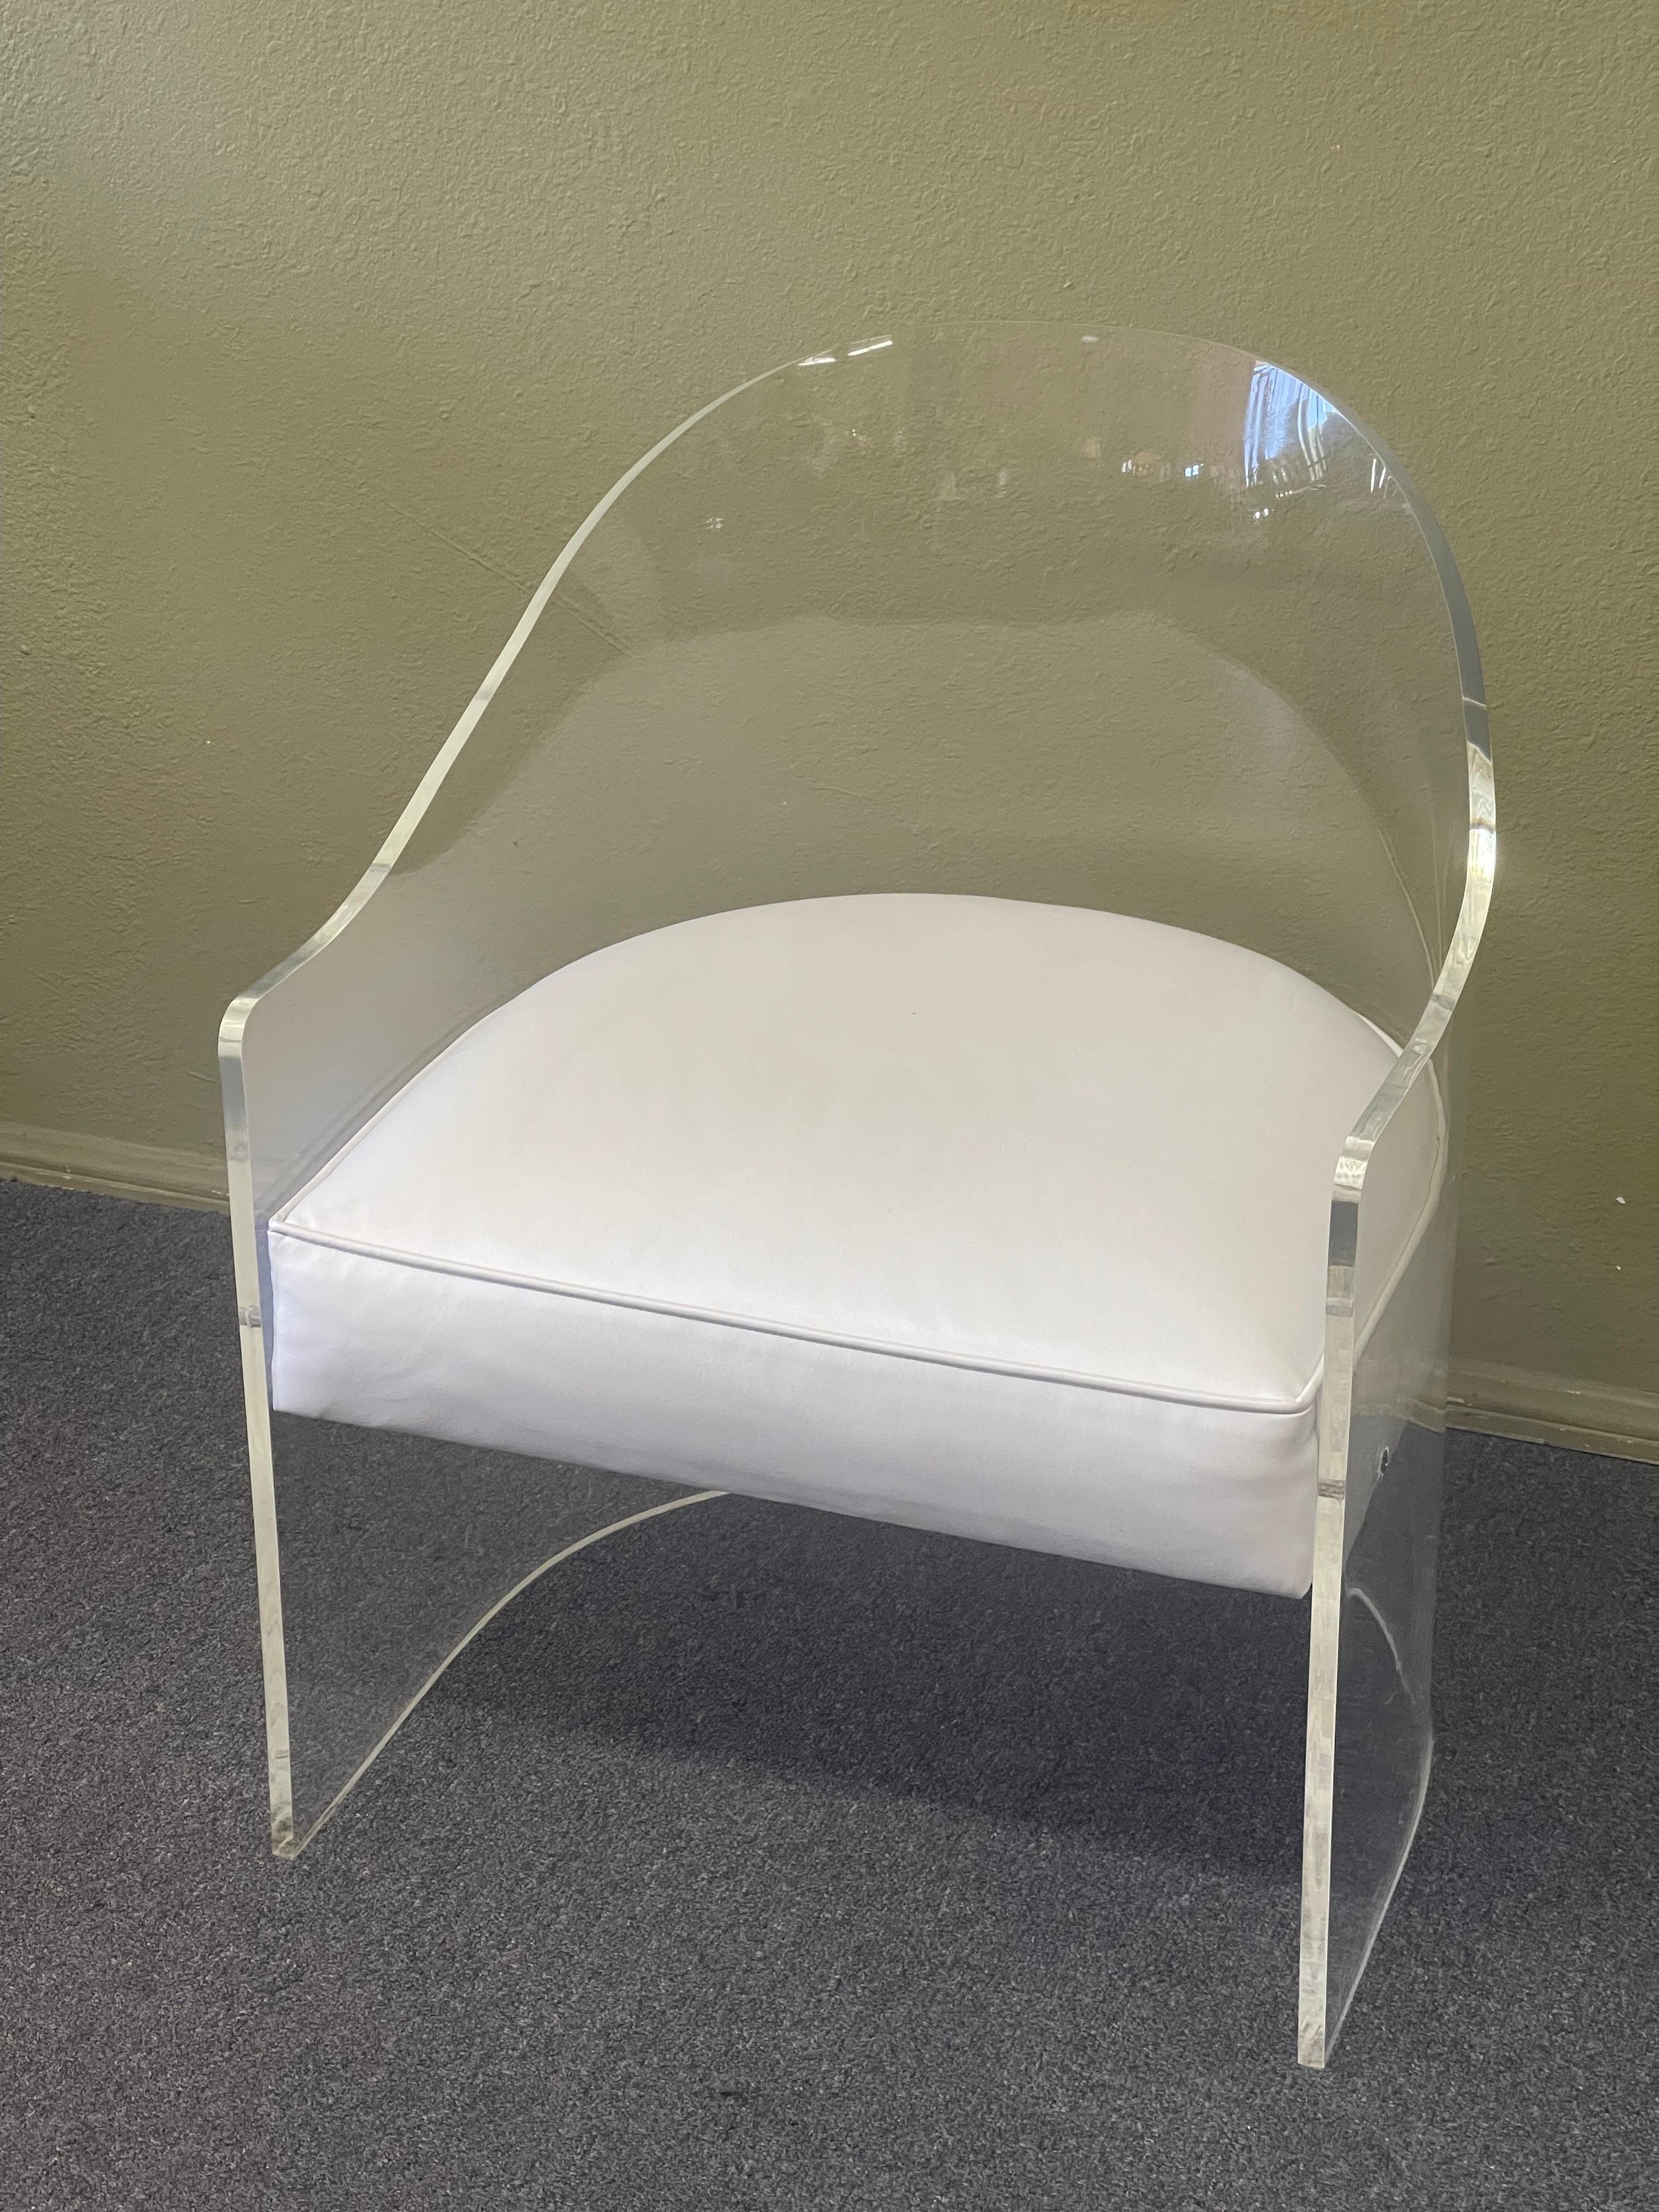 Stylish lucite barrel chair with white naugahyde seat, circa 1970s. The chair is in very good vintage condition with some minor scuffing and scratches around the base; it measures 22.75